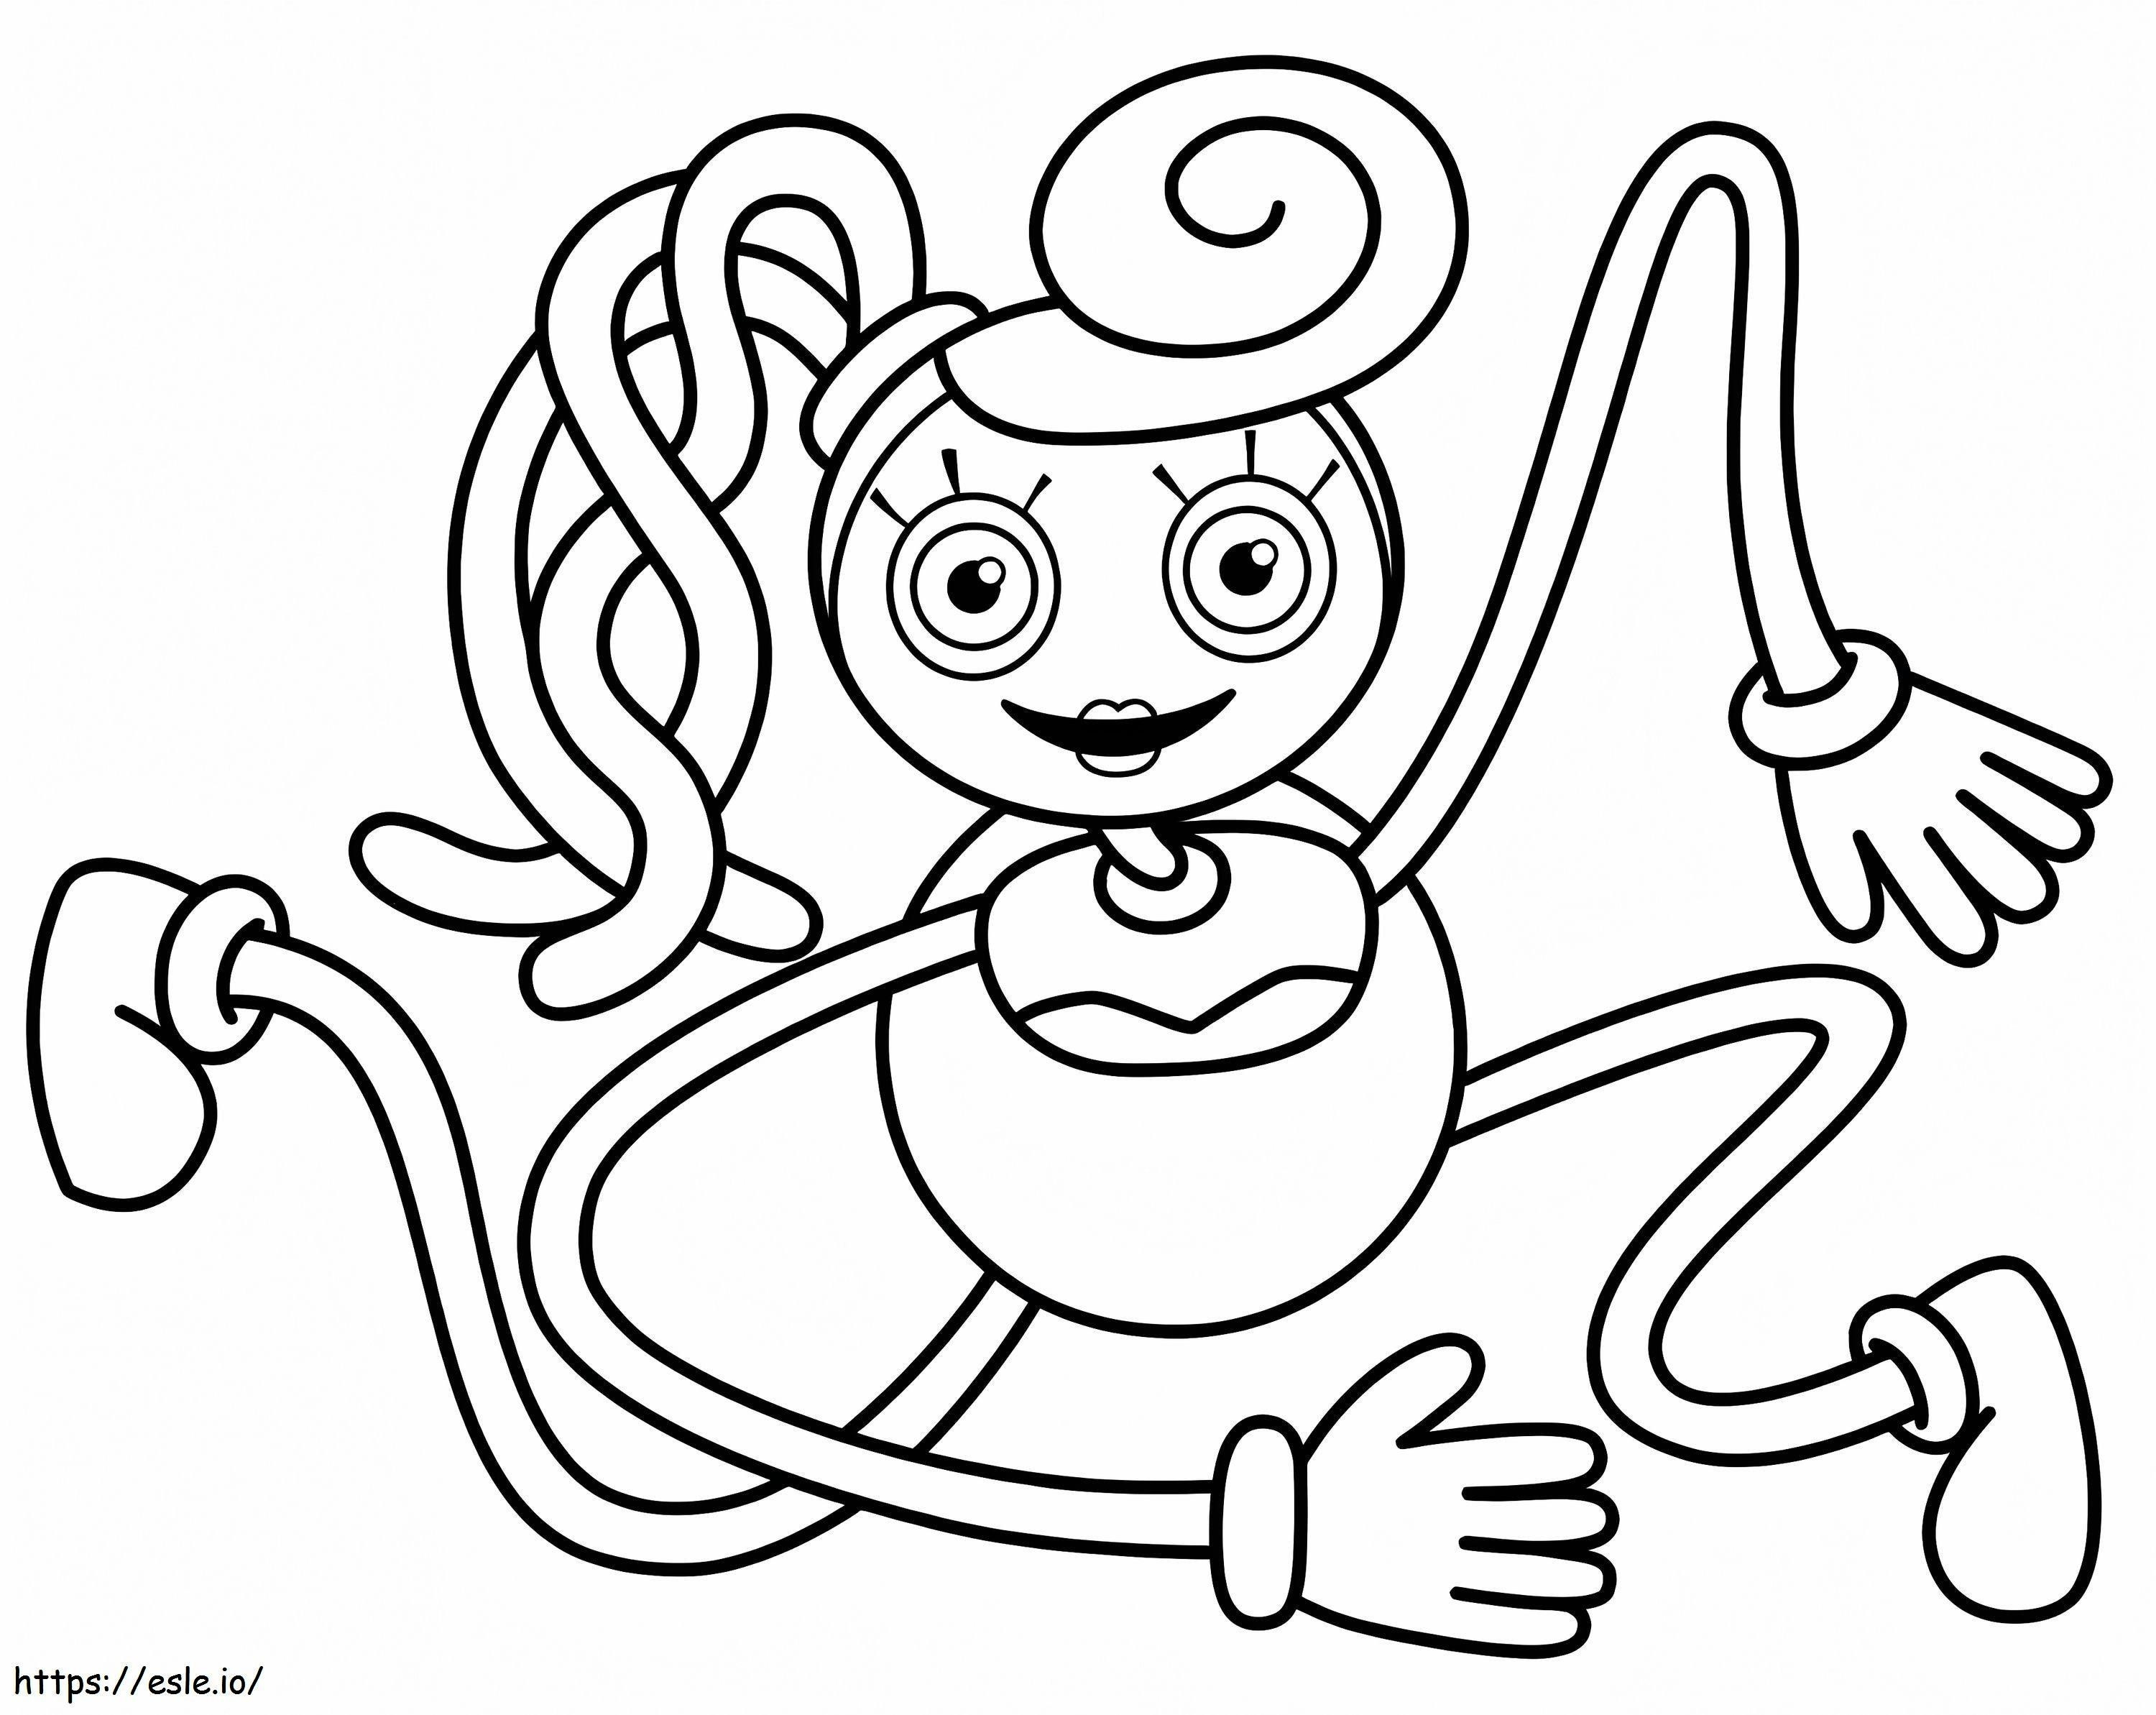 Mommy Long Legs 1 coloring page